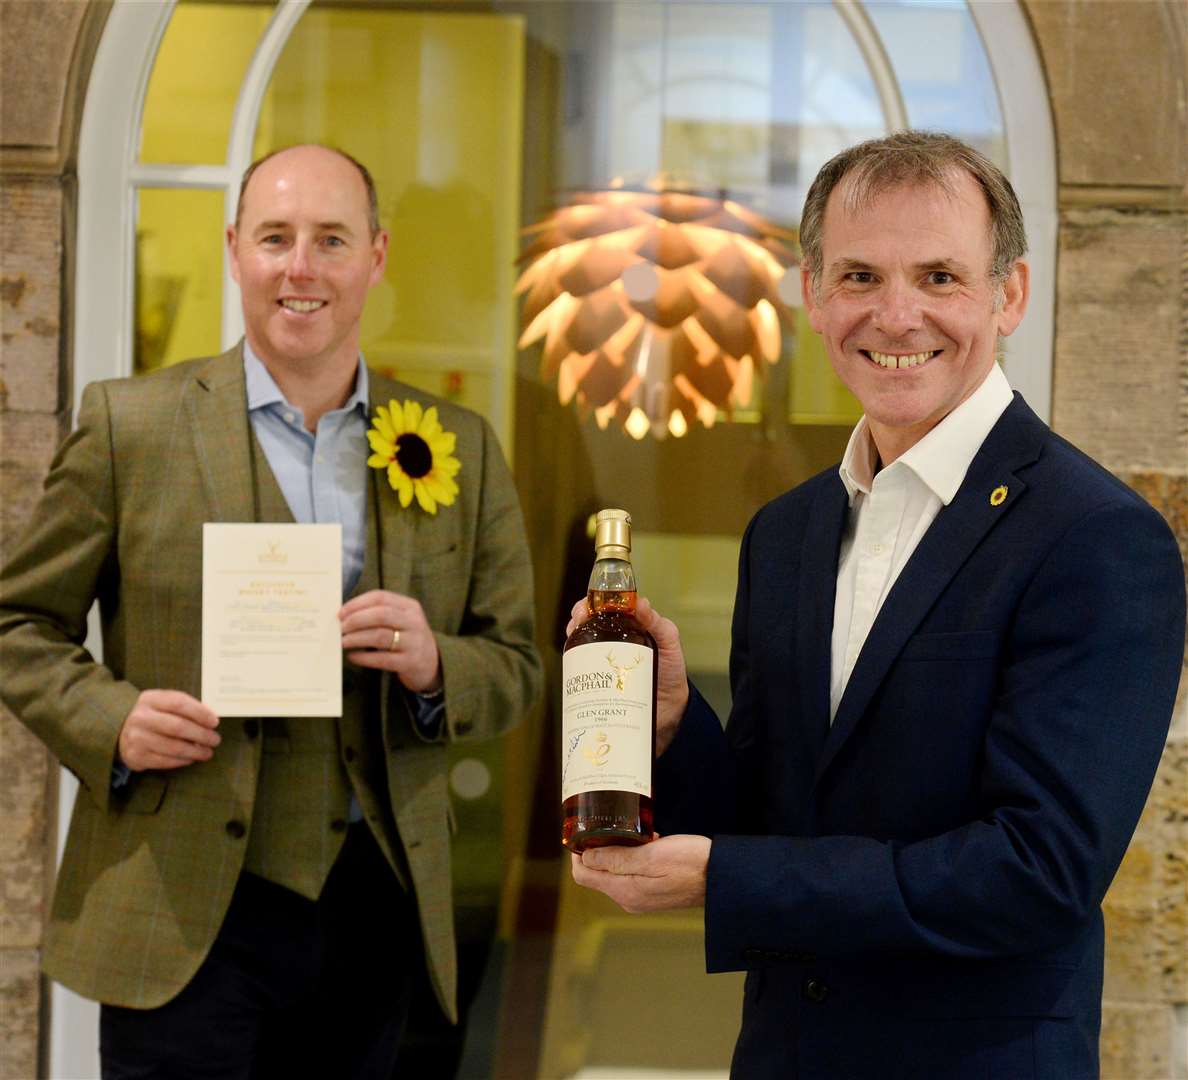 Andrew Leaver, head of fundraising at Highland Hospice, right, with Stephen Rankin of Gordon and MacPhail who has donated a bottle of Glen Grant 1966 and an exclusive whisky trail for six people to help raise funds for the charity.